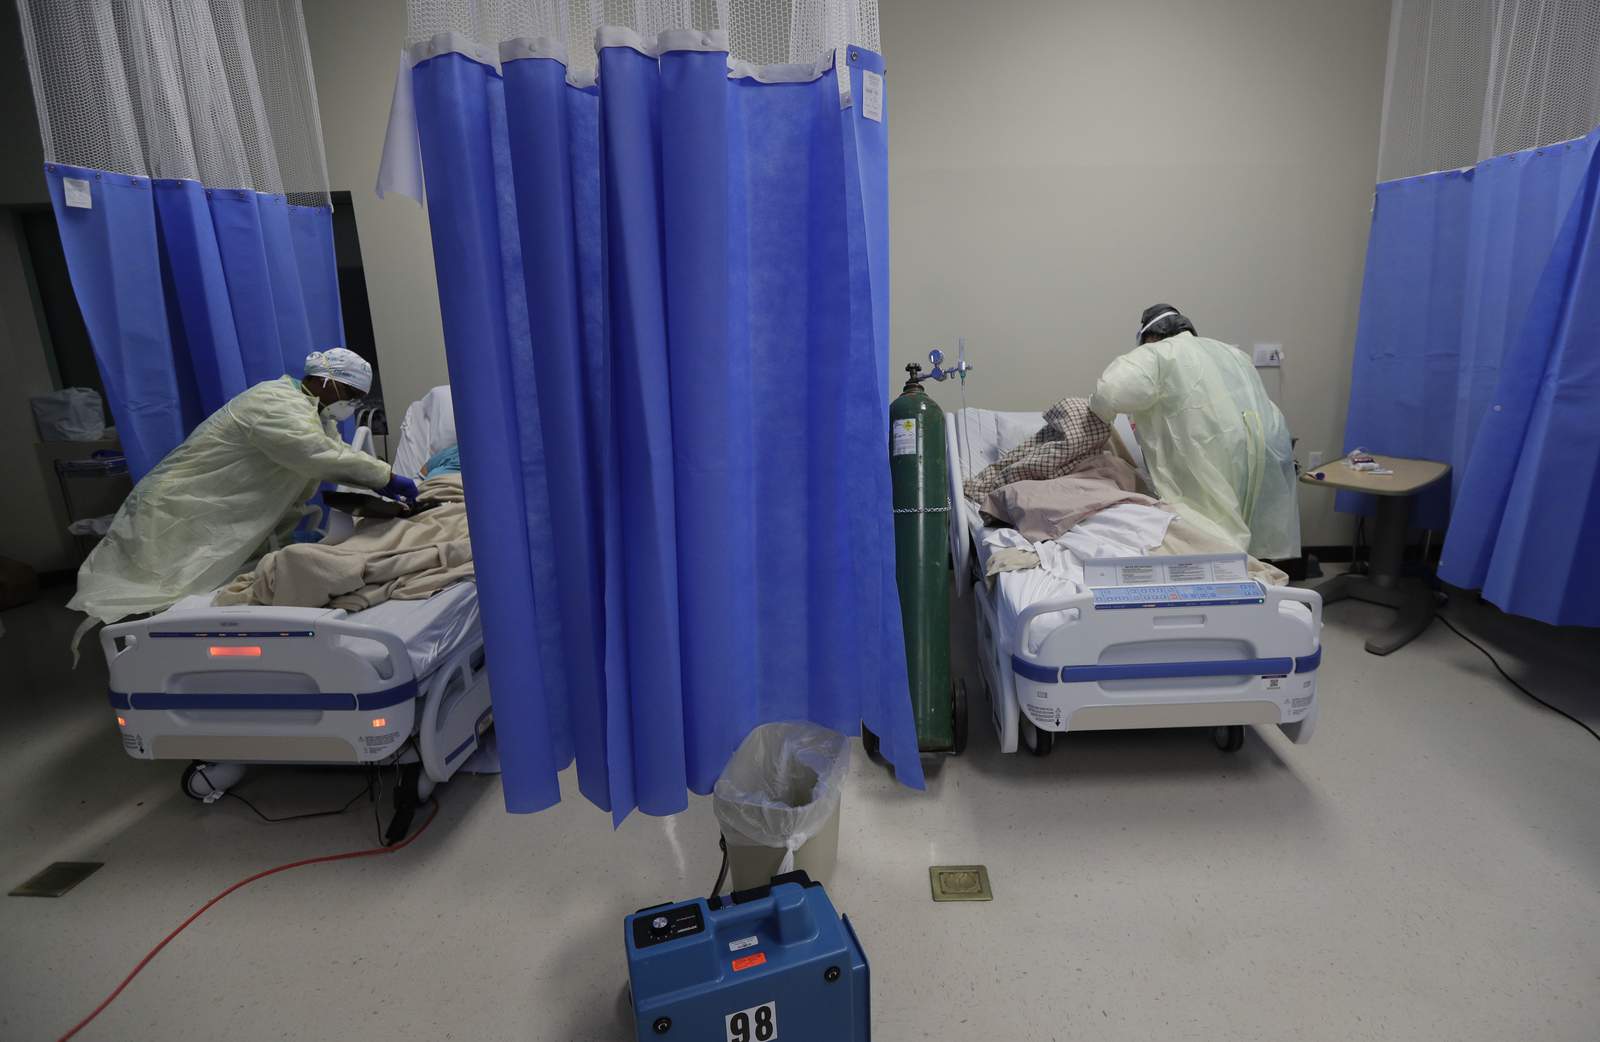 COVID-19 hospitalizations in Texas dip below 5,000 for the first time since June, state reports